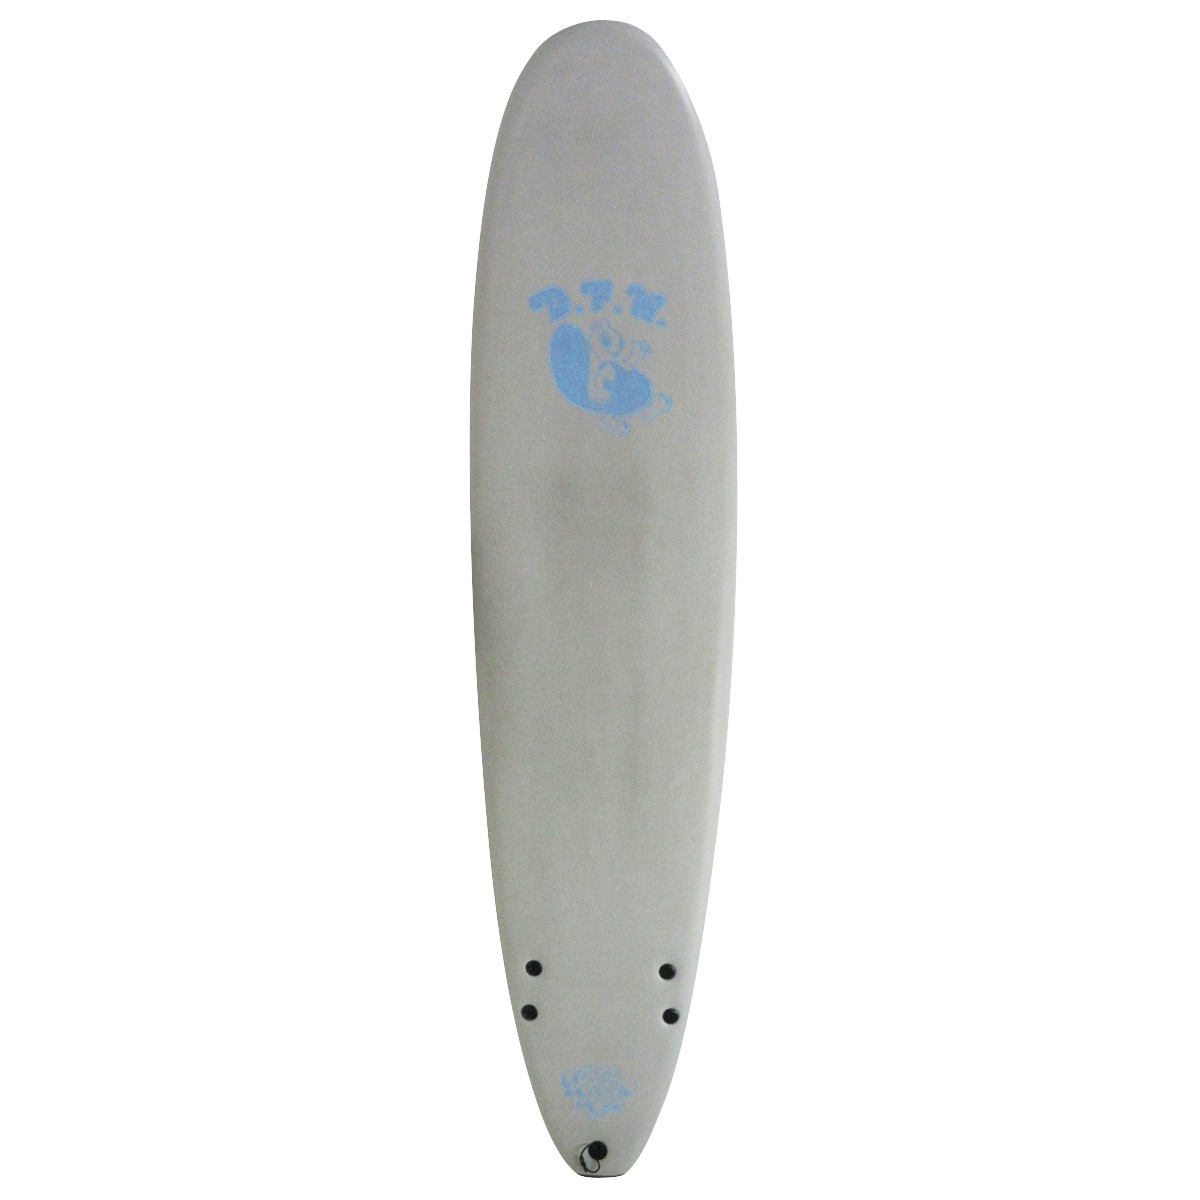 CATCH SURF / BARRY MCGEE DFW EDITION 8`0 SIDE BITE FIN